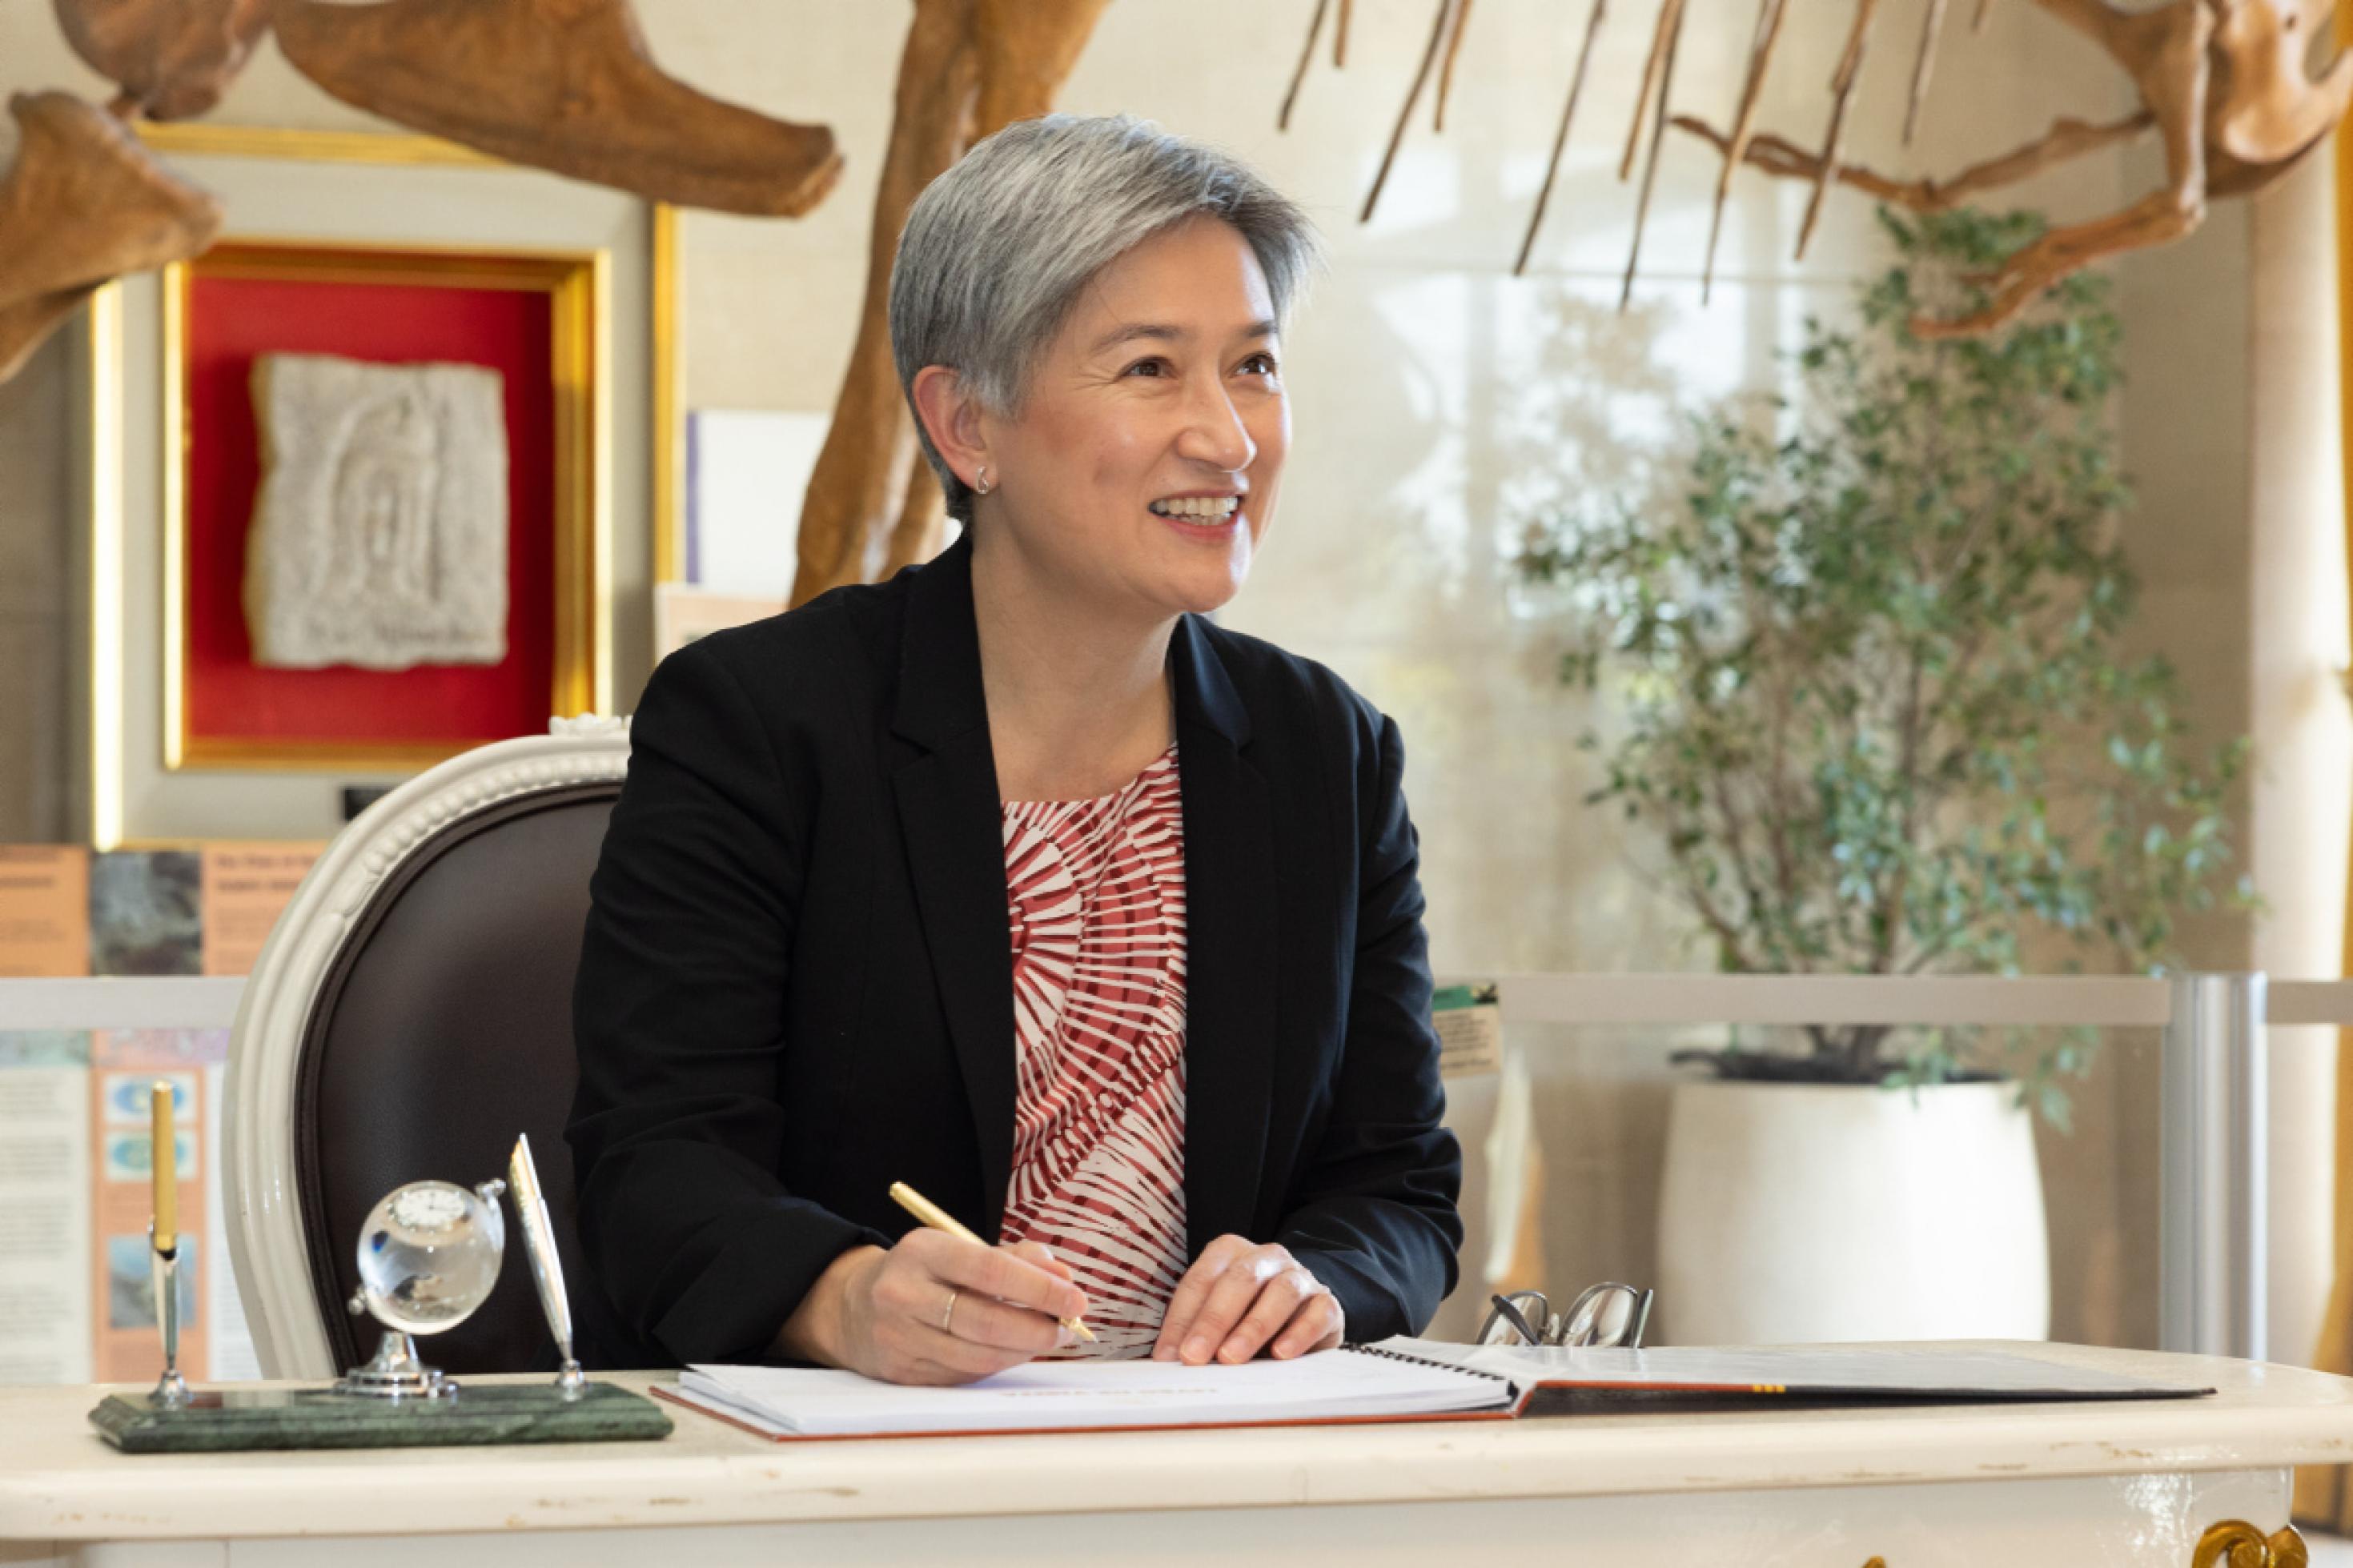 Senator the Hon Penny Wong, Minister for Foreign Affairs, signs a guestbook for official guests, before meeting with His Excellency Dr José Ramos-Horta, President of Timor-Leste, at the Presidential Palace in Timor Leste. The meeting takes place as part of Foreign Minister Wong’s visit to Dili, Timor Leste.

Australian attendees: ?
-  Senator the Hon Penny Wong, Minister for Foreign Affairs ?
-  Chargé Wilson ?
-  Mr Patrick Ingle, Policy Adviser to Minister Wong ?
-  Ms Phoebe Bowden, Press Secretary to Minister Wong ?
-  Ms Michelle Chan, Deputy Secretary, Southeast Asia and Global Partners Group, DFAT ?
-  The Hon Steve Bracks AC, Australia’s Special Representative for Greater Sunrise ?
-  Ms Jenny Samiec, Executive Officer to Australia’s Special Representative ?
-  Mr Glenn Maloney, Second Secretary (Political), Australian Embassy Dili?
-  Ms Langridge ?
July 7, 2023.